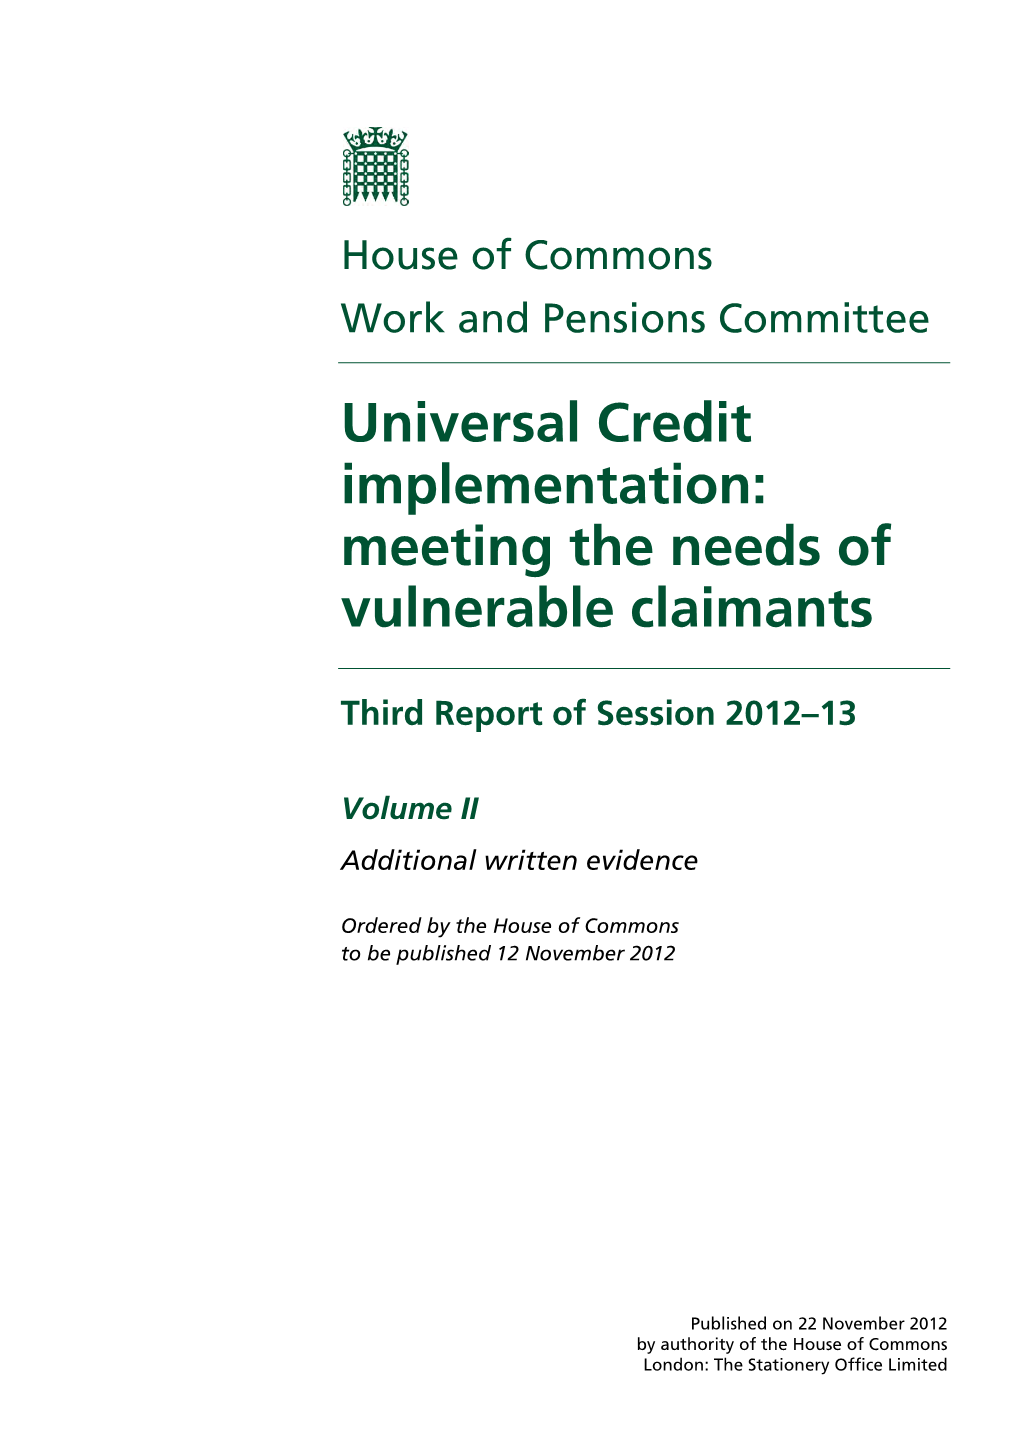 Meeting the Needs of Vulnerable Claimants